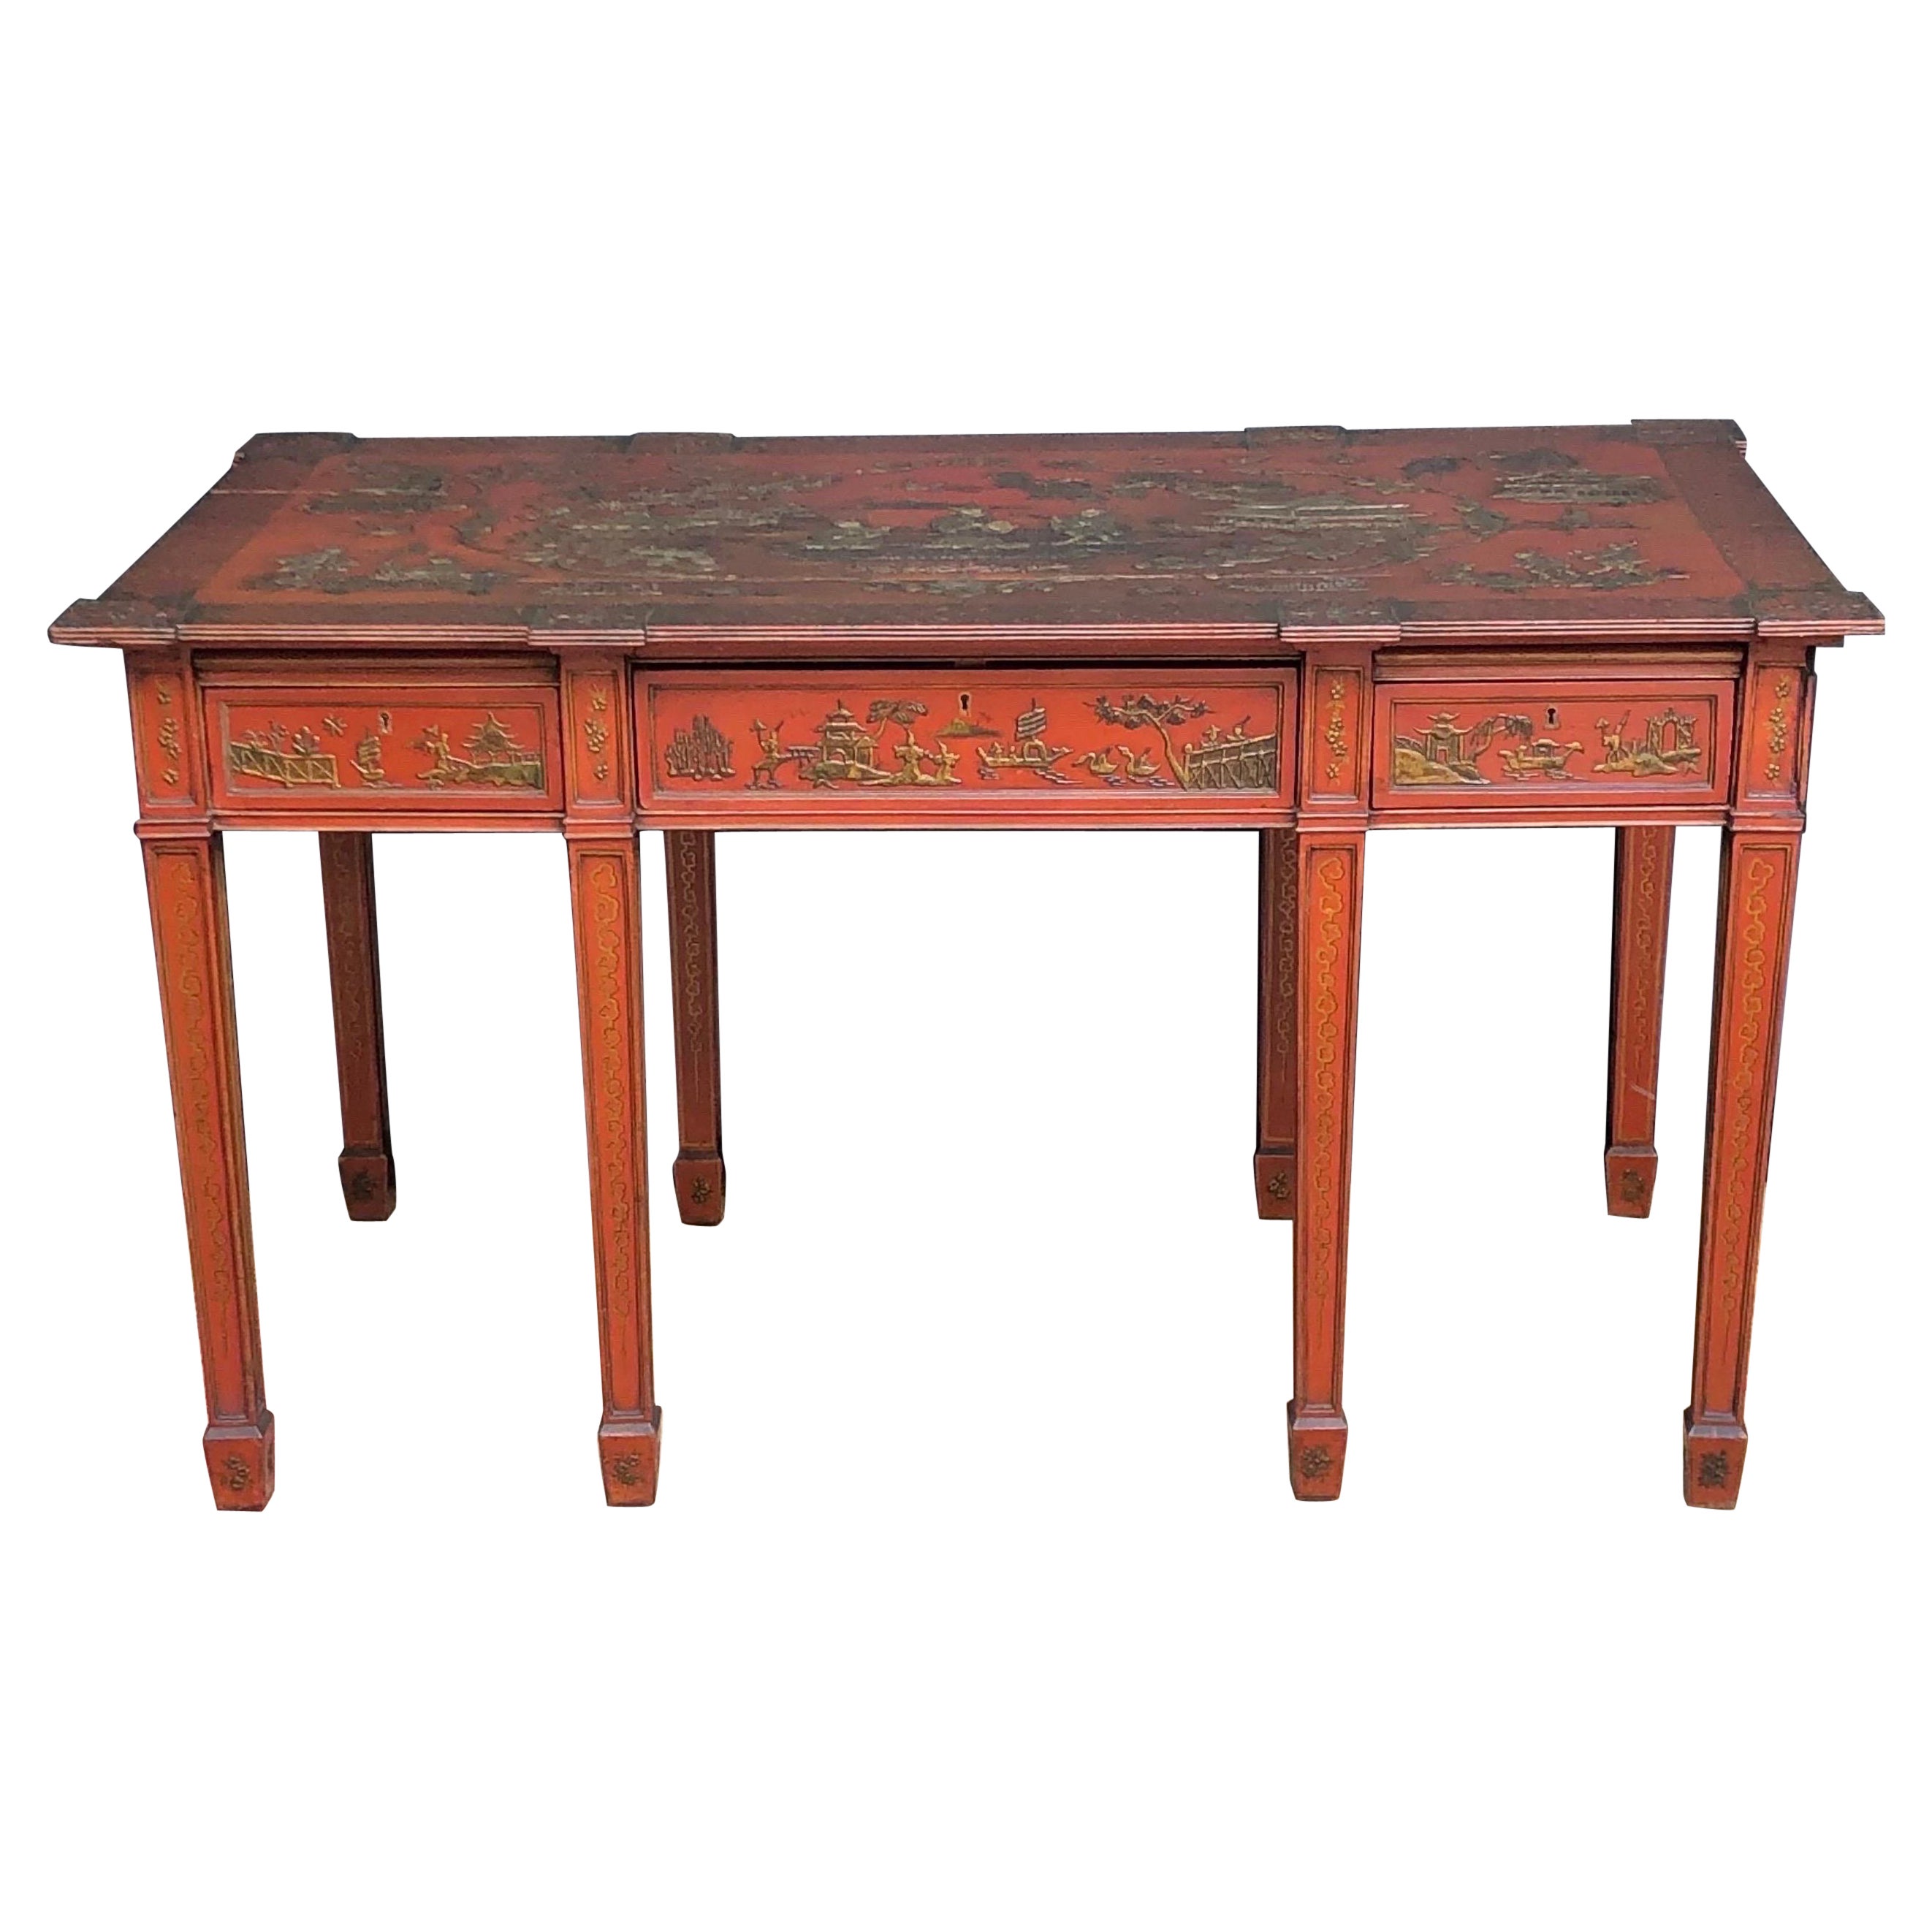 Chinoiserie Imperial Red English Writing Partners Desk / Library Table, 19th C